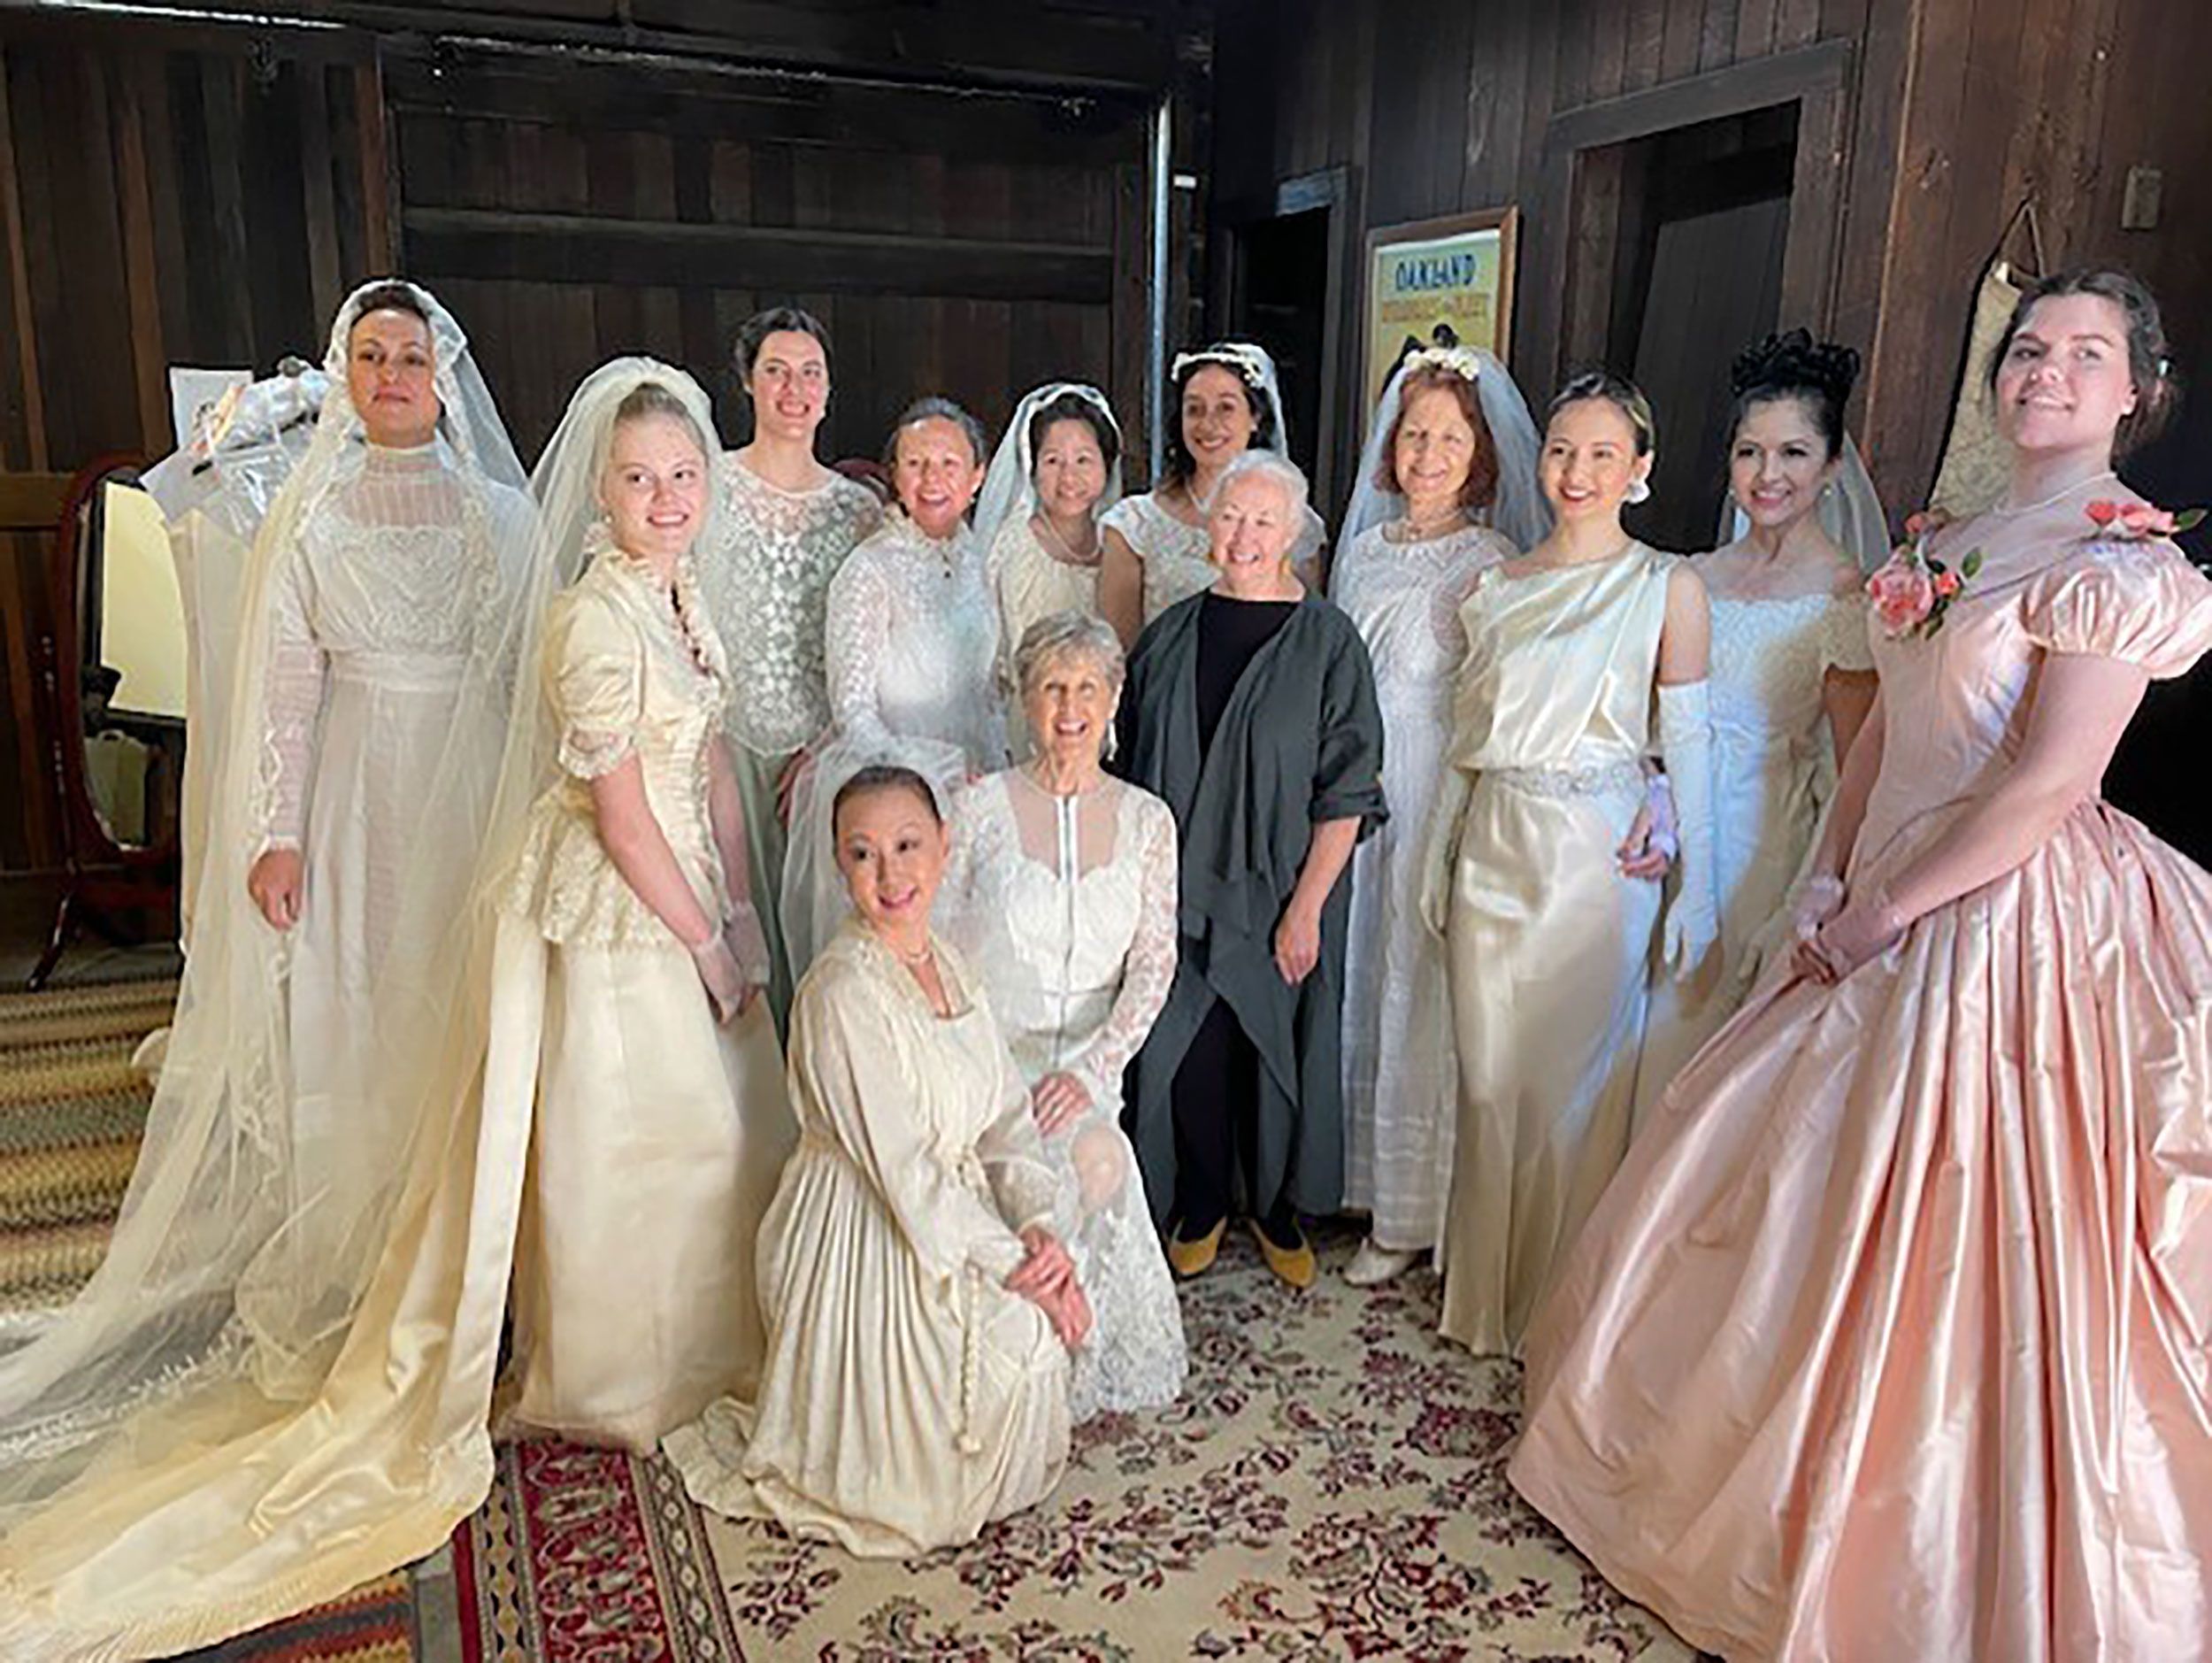 A wedding dress restorer brings new life to more than 150 years of history